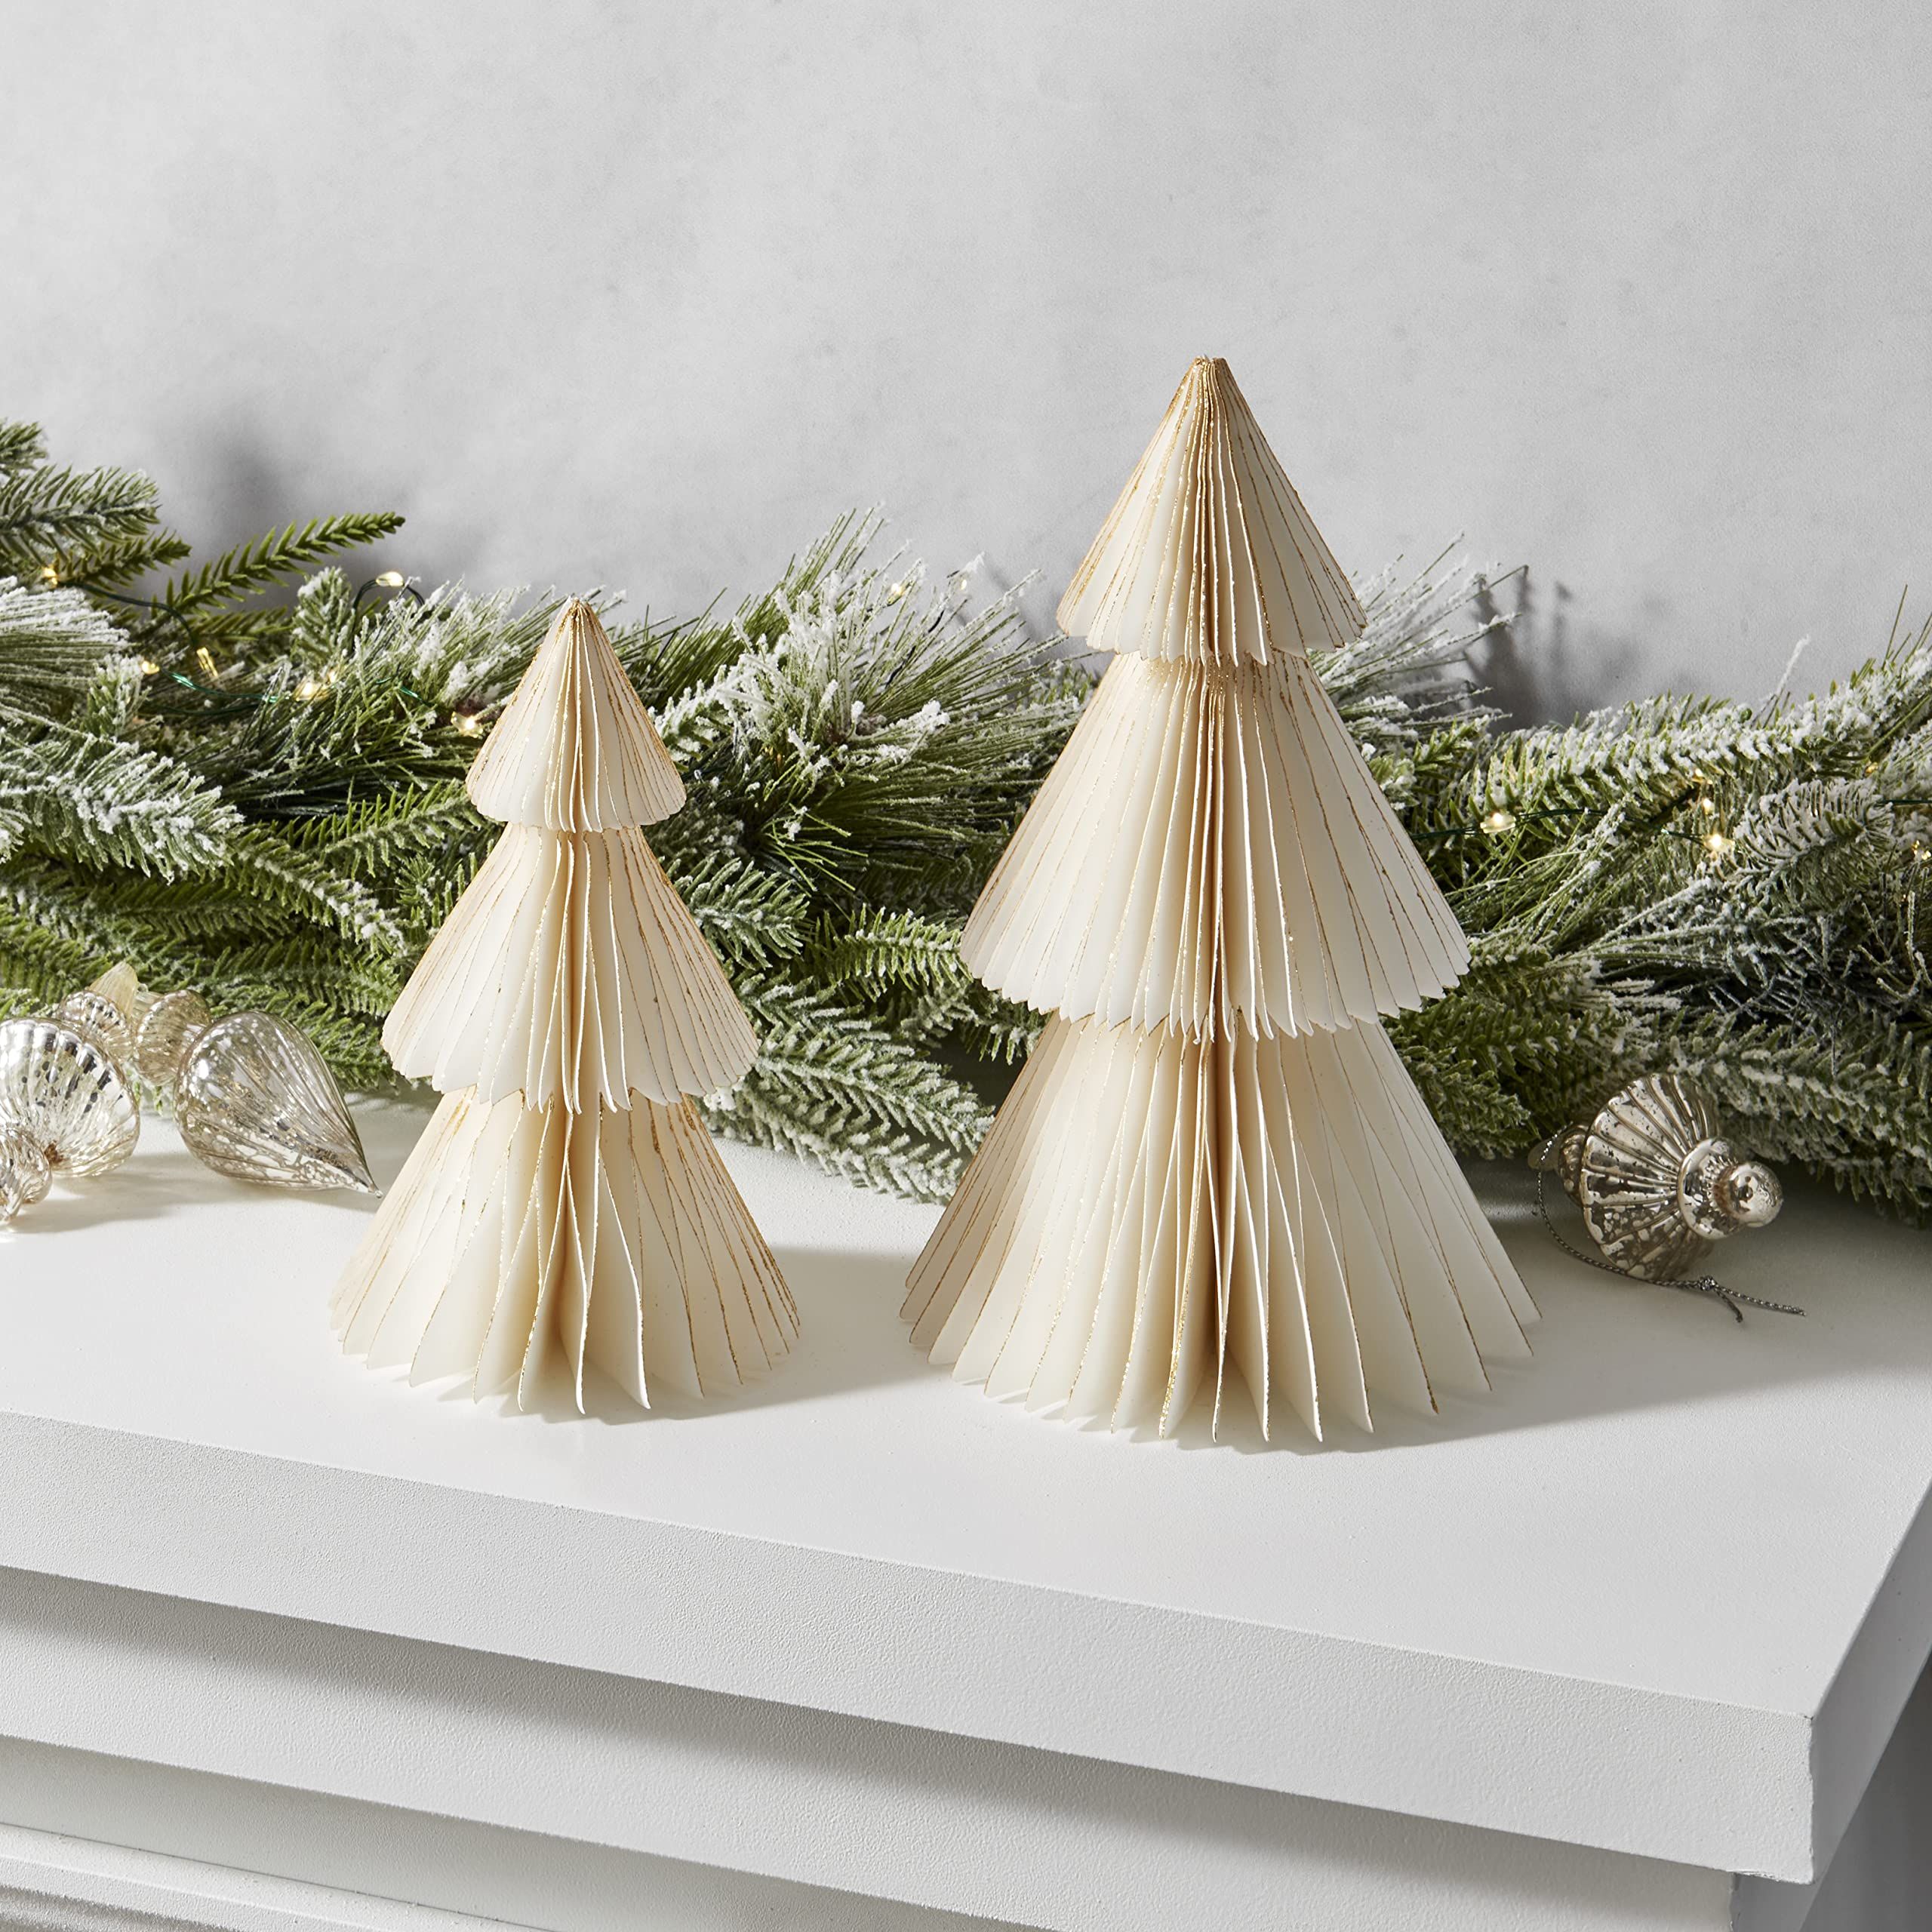 Paper Christmas Tree Decor - Set of 2 Honeycomb Trees, 6 Inch and 8 Inch, Vintage Style Holiday Deco | Amazon (US)